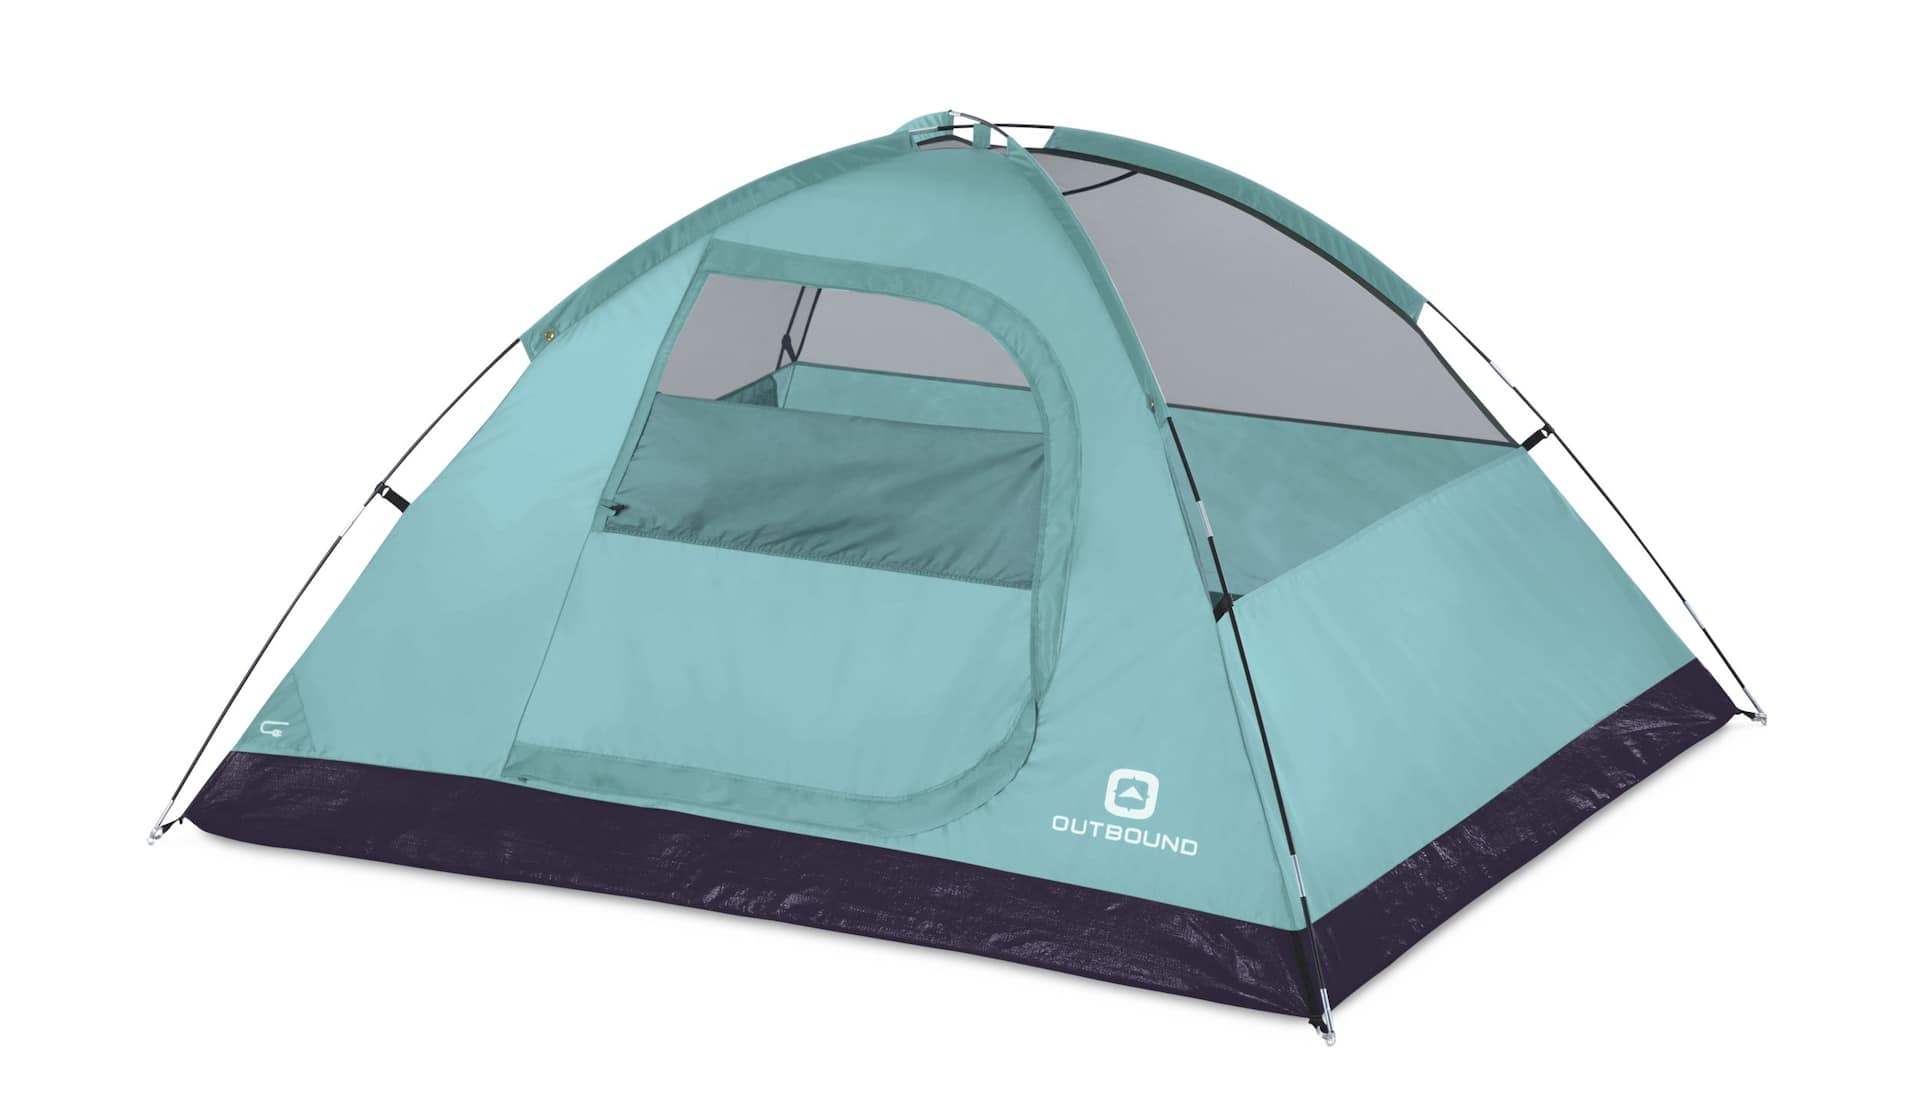 https://media-www.canadiantire.ca/product/playing/camping/tents-shelters/0765443/outbound-3-person-dome-tent-25376129-55b8-453c-a7f2-27672a747aac-jpgrendition.jpg